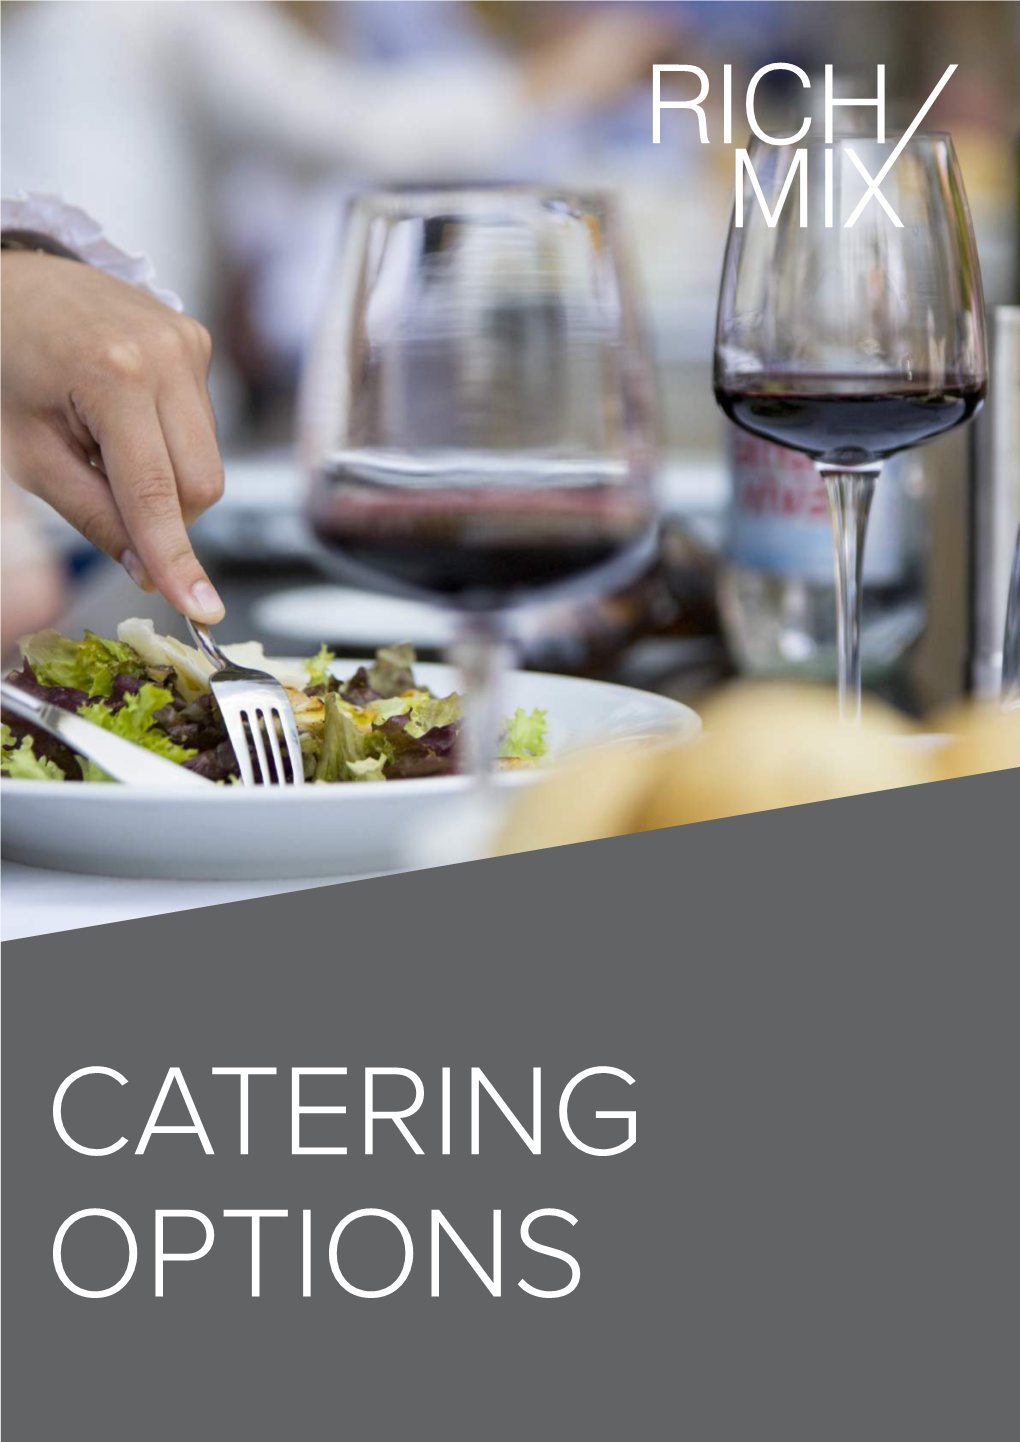 CATERING OPTIONS Contents